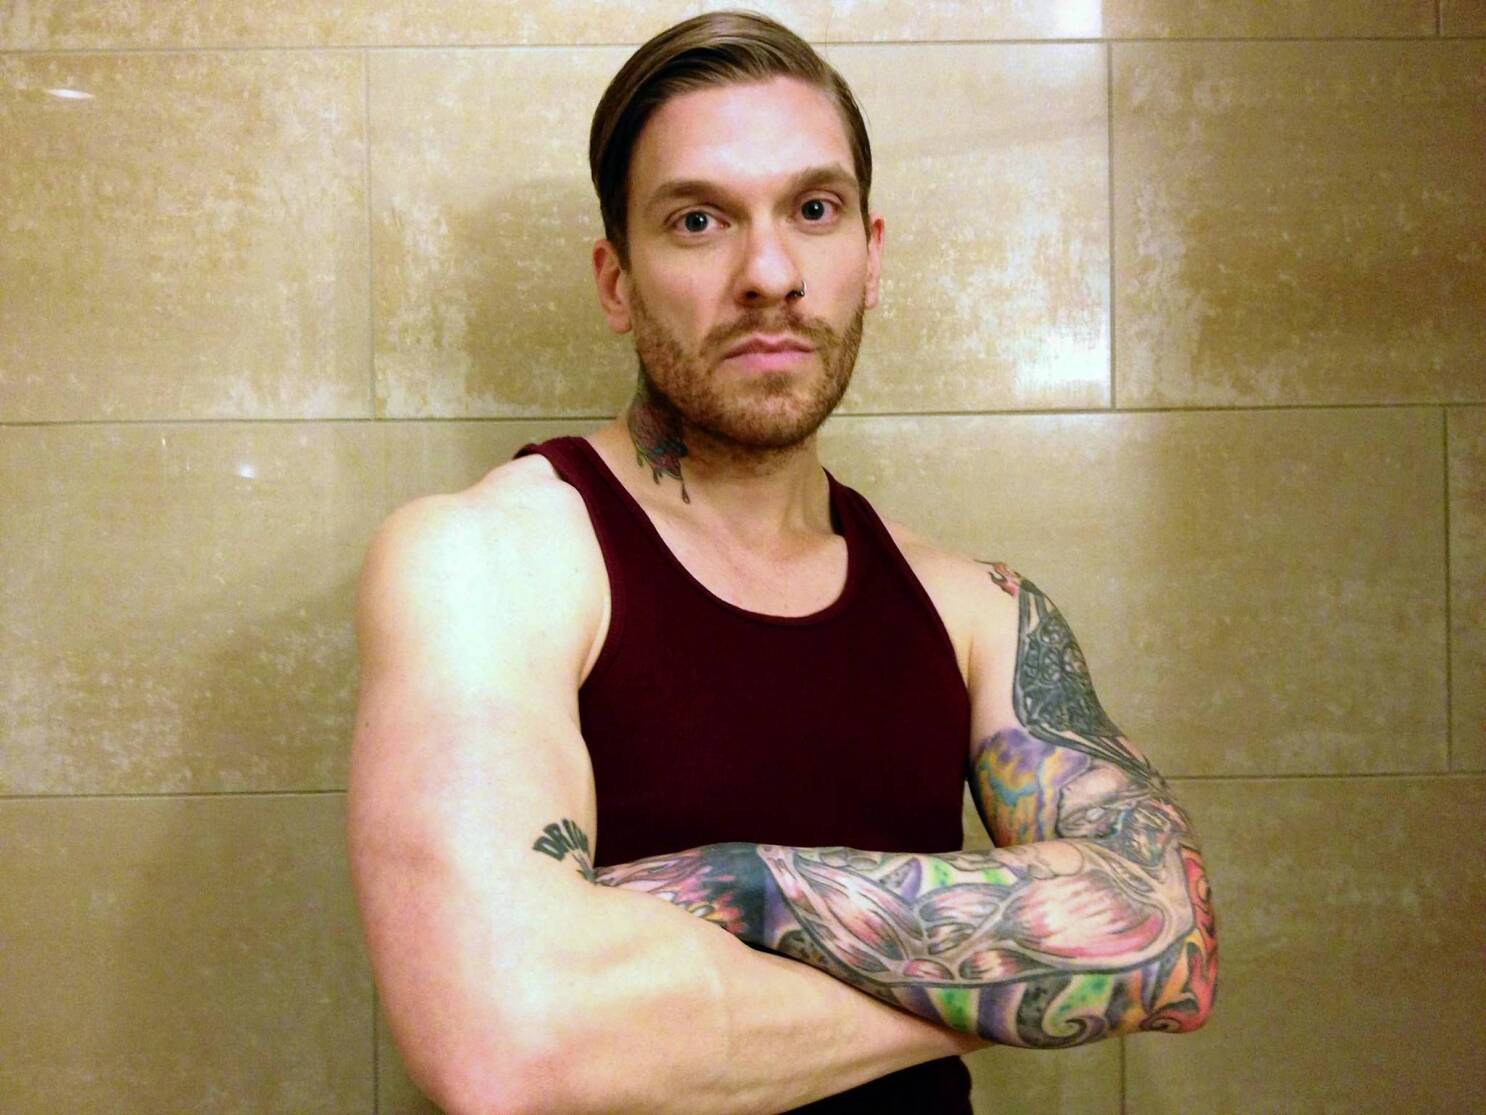 What Happened To The Lead Singer Of Shinedown